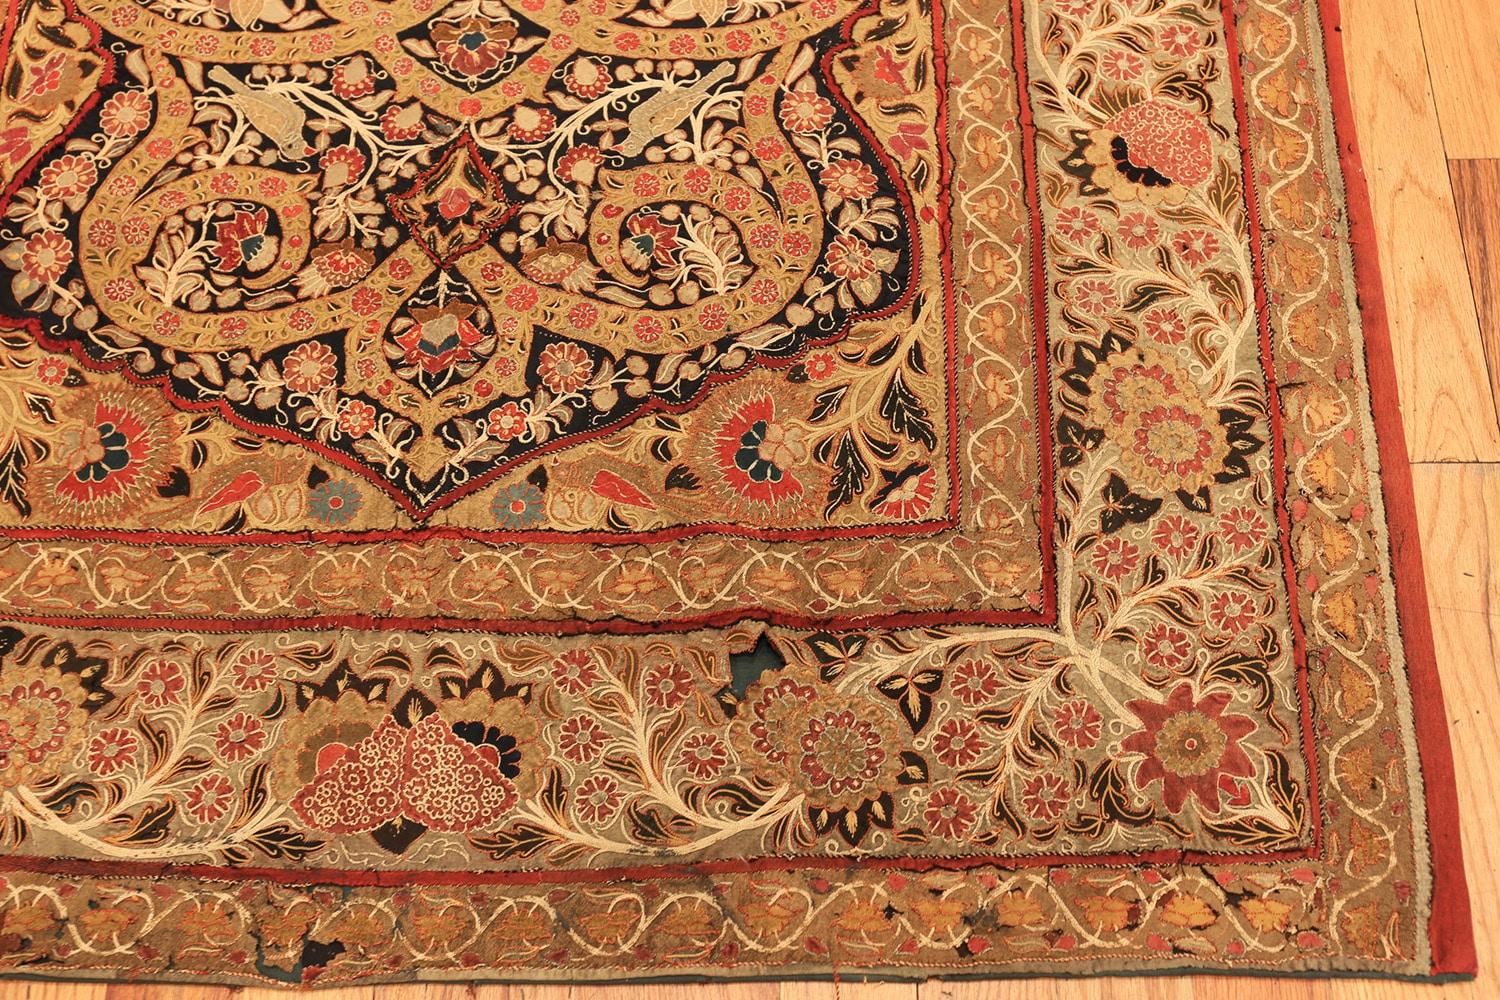 Hand-Woven Antique Persian Silk Embroidery. 4 ft. 5 in x 7 ft. 5 in For Sale